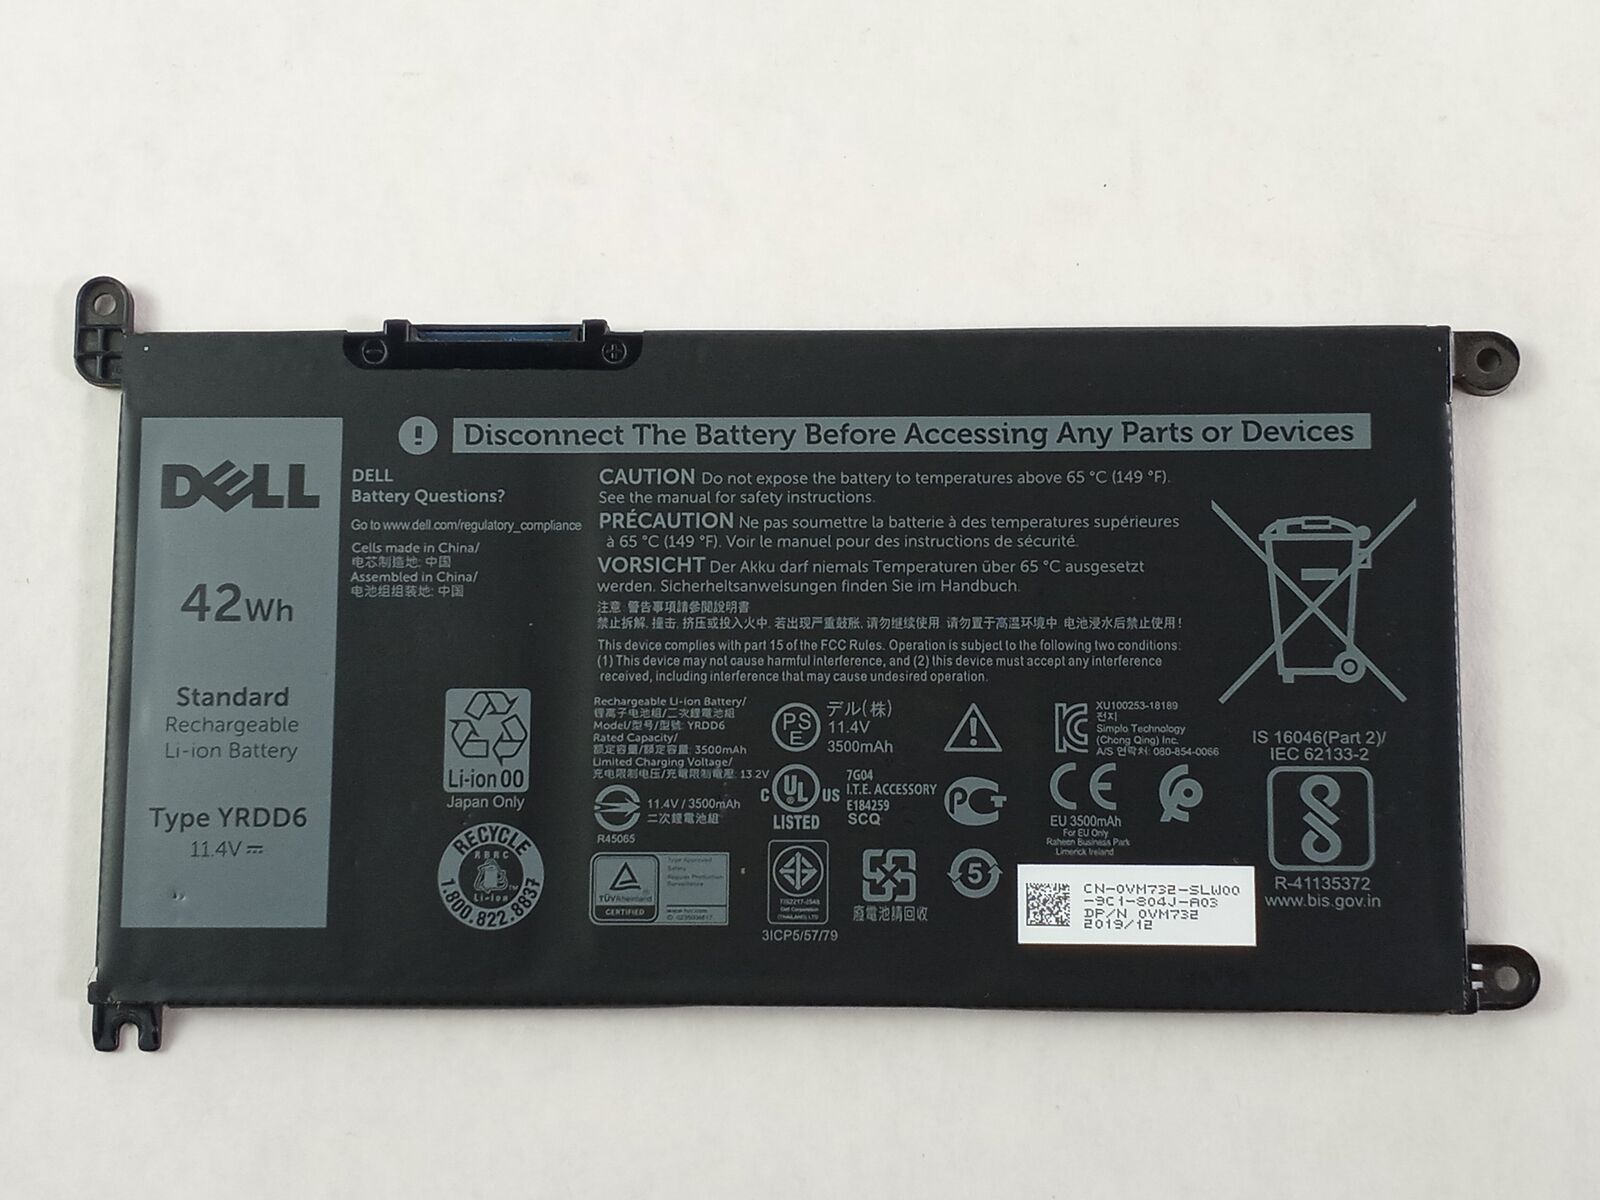 Lot of 5 Dell YRDD6 42Wh 3 Cell Laptop Battery for Latitude 3310 / Inspiron 14